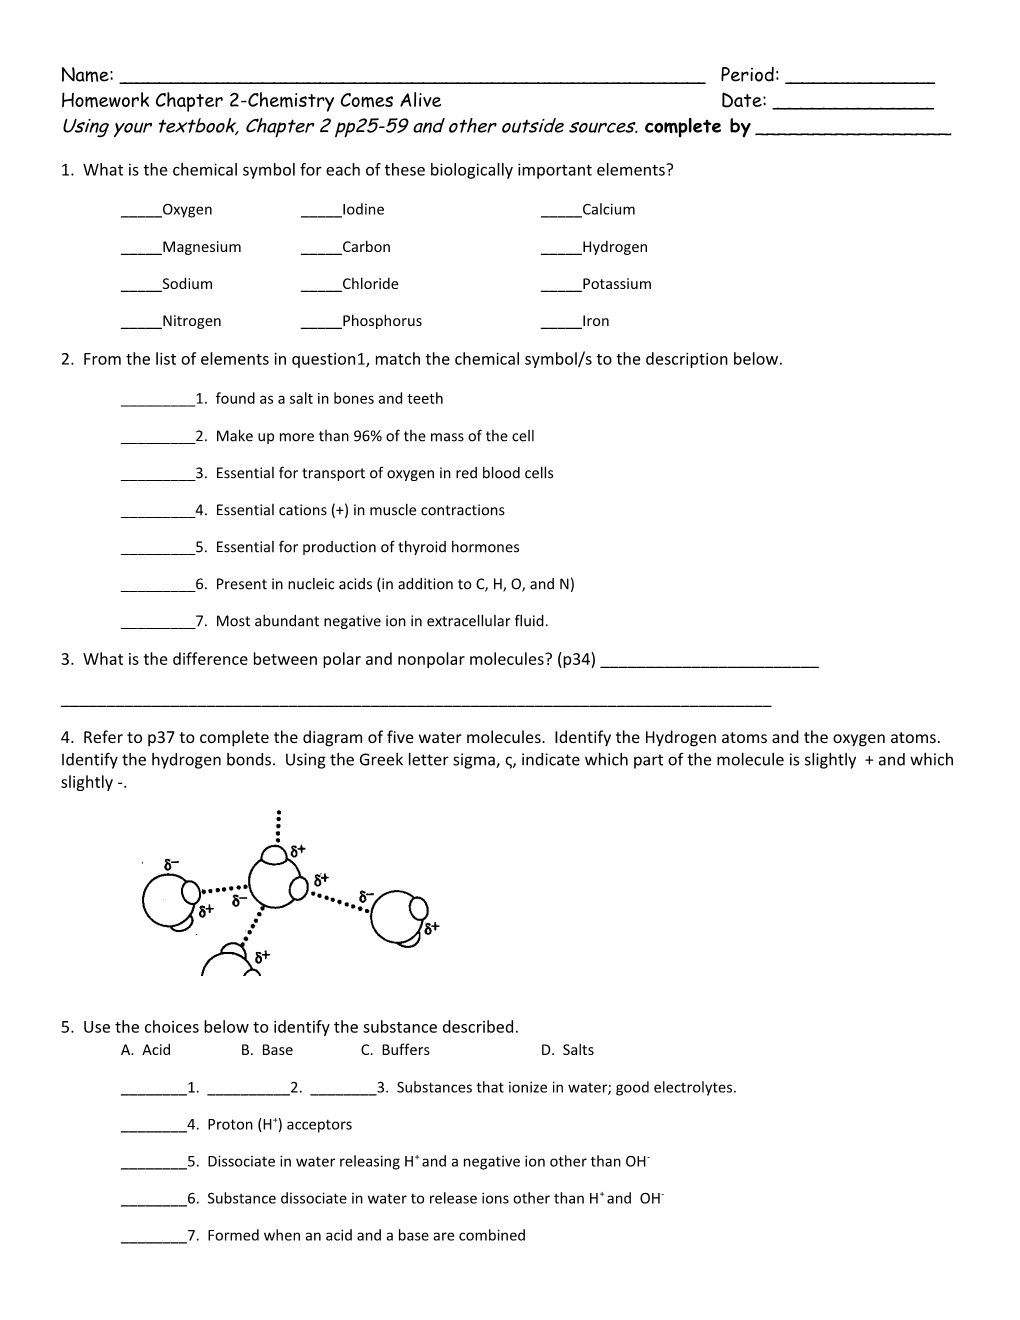 Homework Chapter 2-Chemistry Comes Alive Date: ______